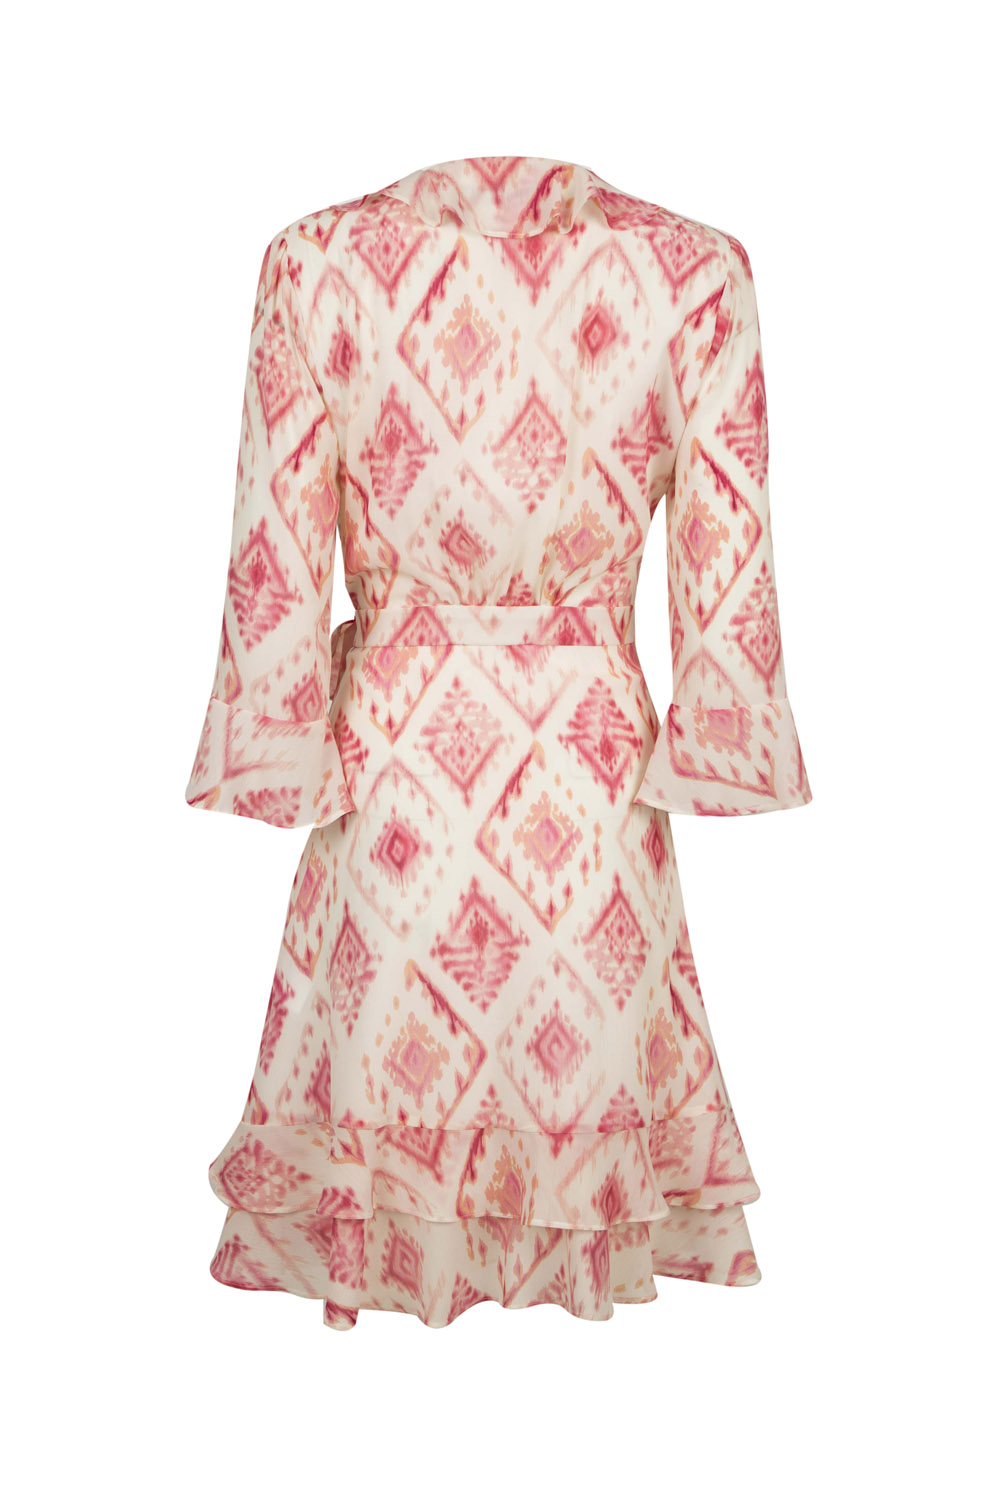 Ikat Patterned Sheer Wrap Dress with Frills (and Incorporated Cotton Lining)